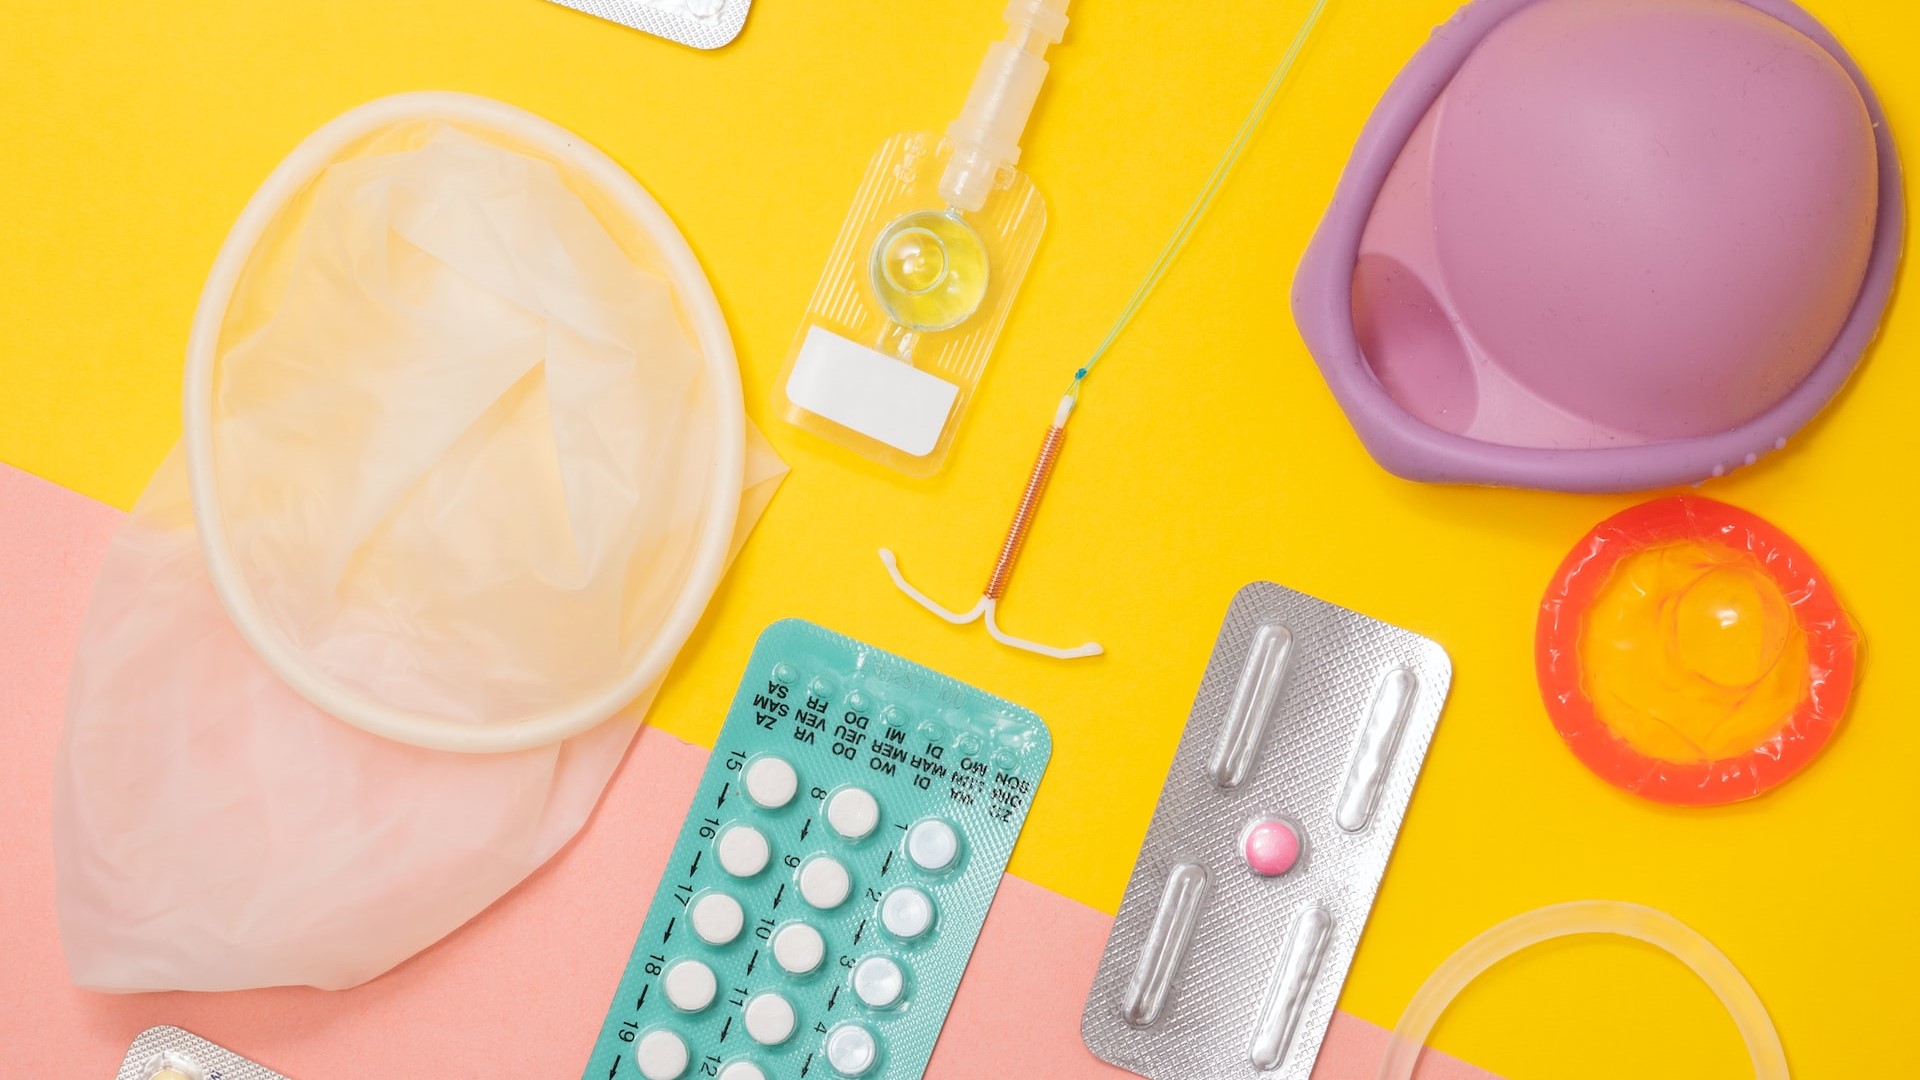 Contraceptive Forms Photo credit: Reproductive Health Supplies Coalition on Unsplash